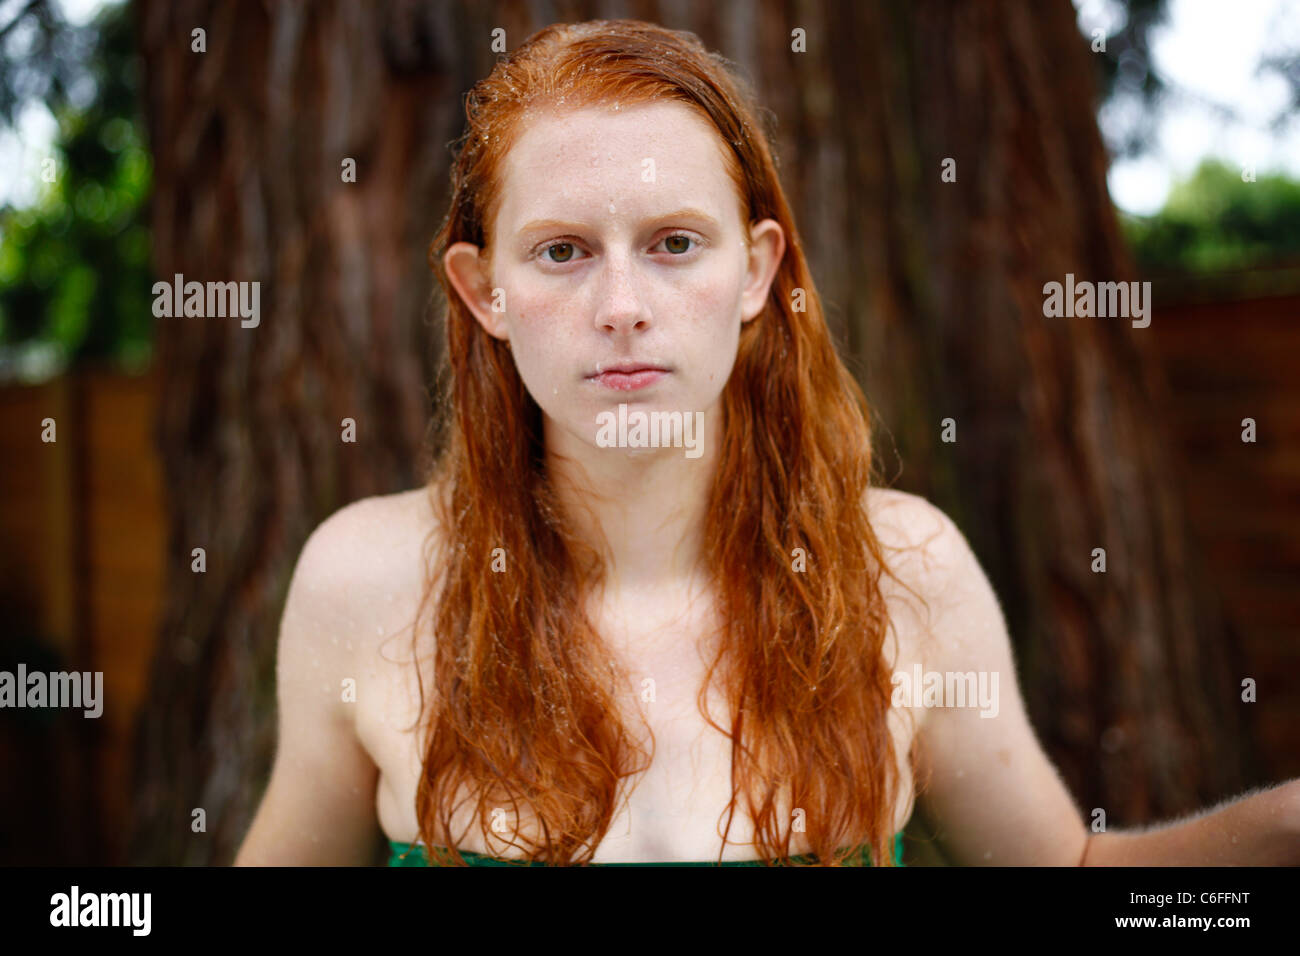 Serious readhead young woman teen with red hair and freckles. Stock Photo